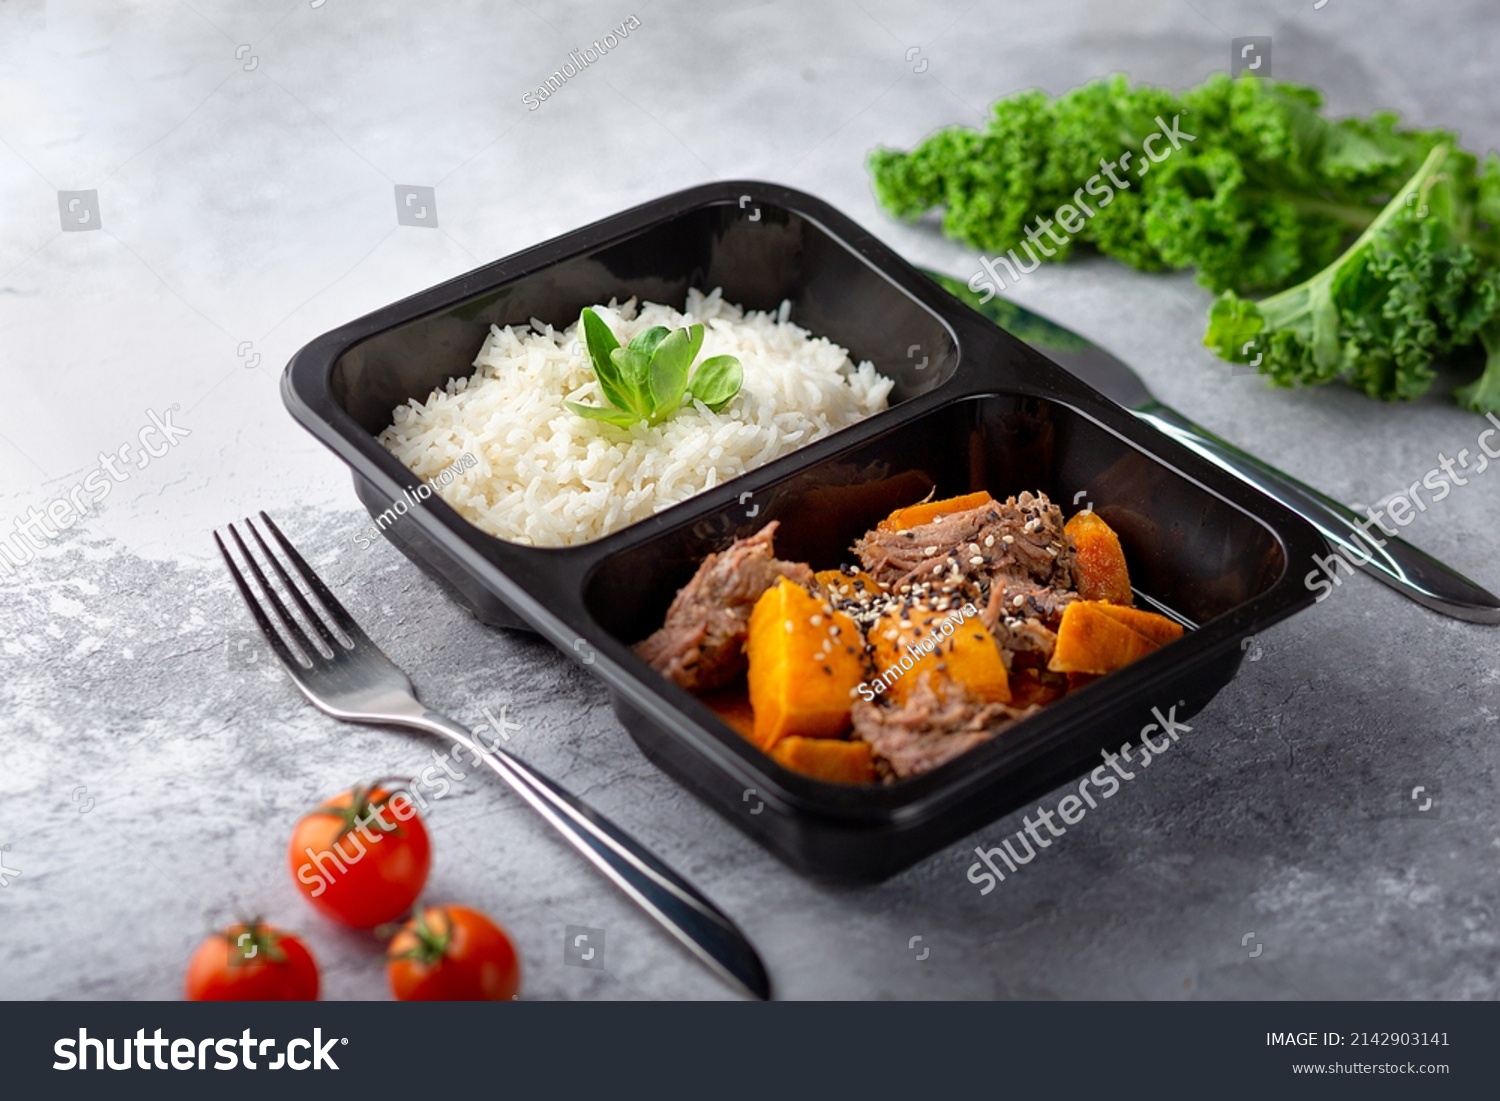 a dish in a black disposable container from catering on a concrete background, dietary catering, ready meals with you, healthy food #2142903141